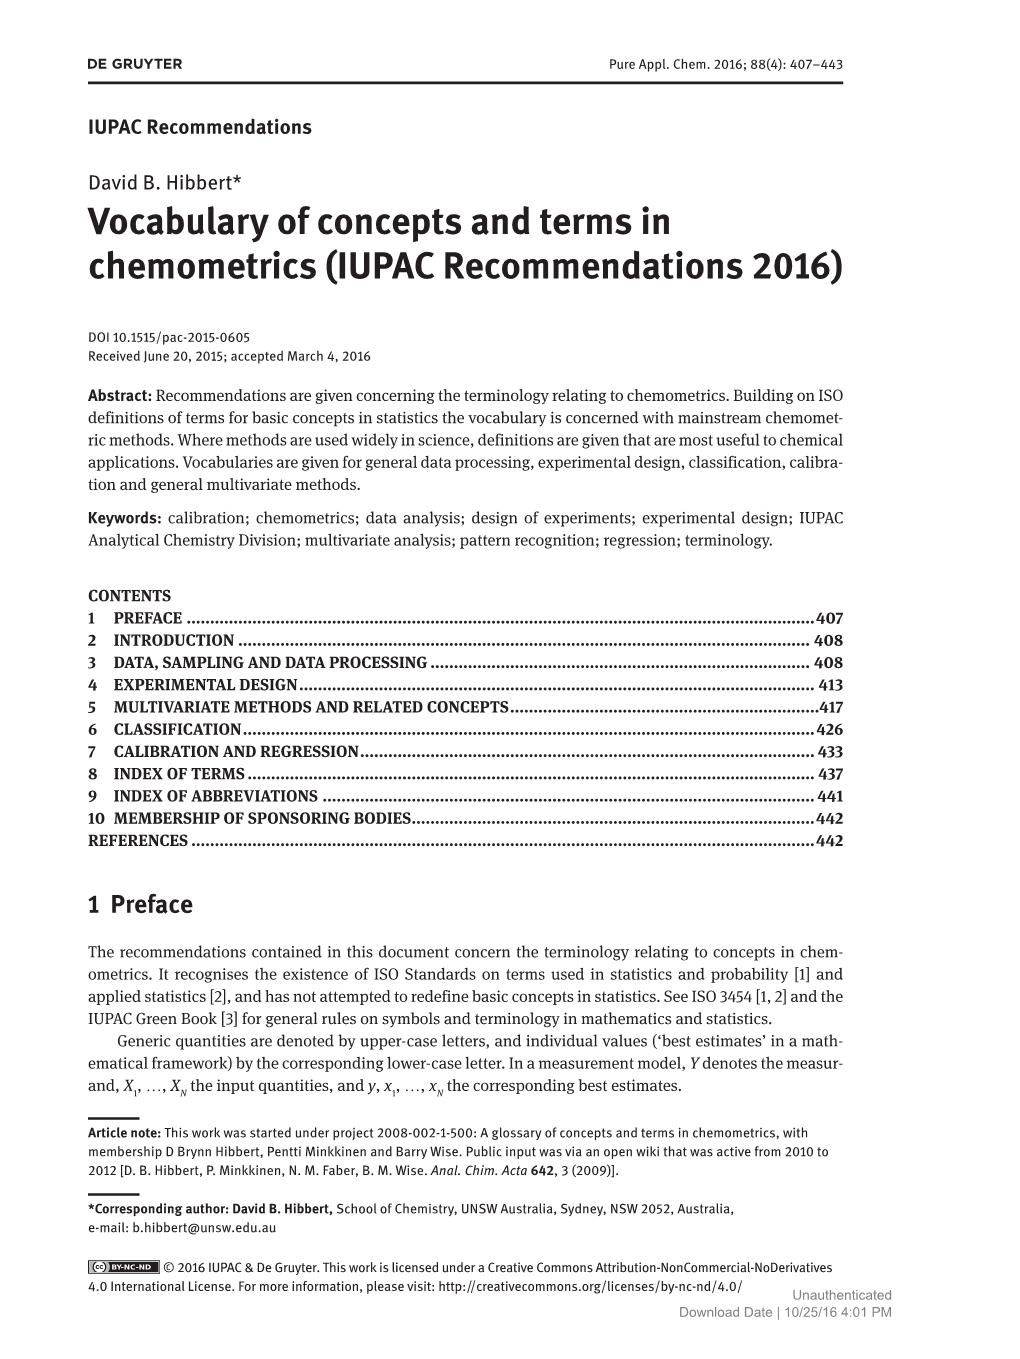 Vocabulary of Concepts and Terms in Chemometrics (IUPAC Recommendations 2016)